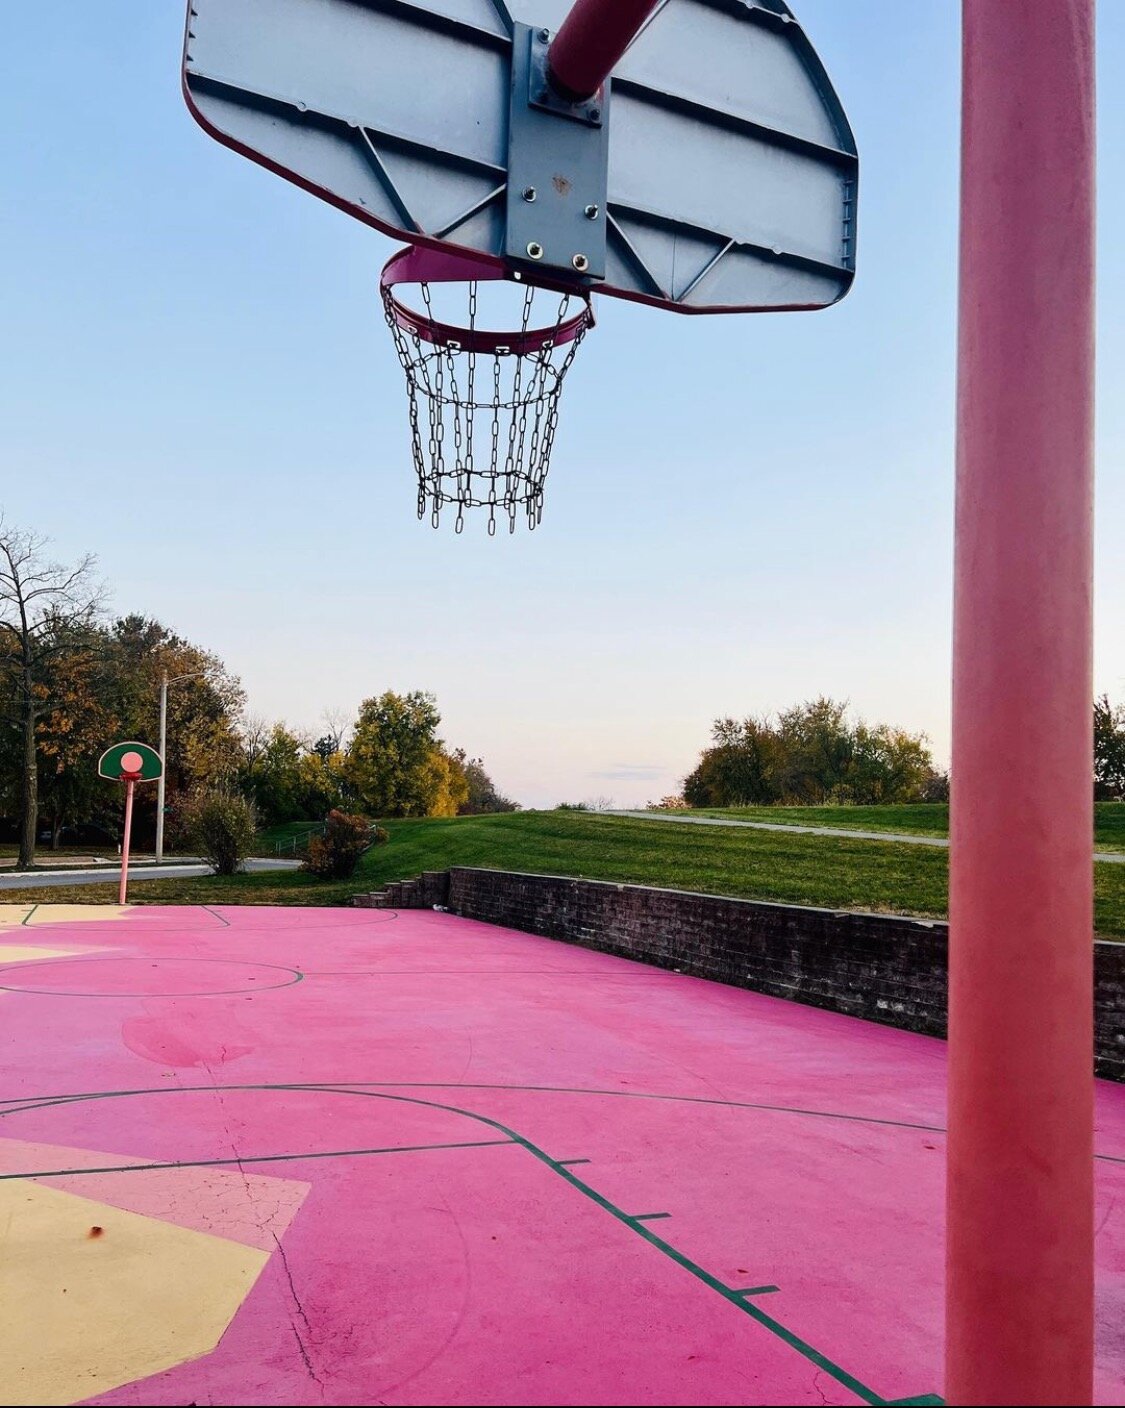 The basketball court at Carl O’Neal Memorial Park.